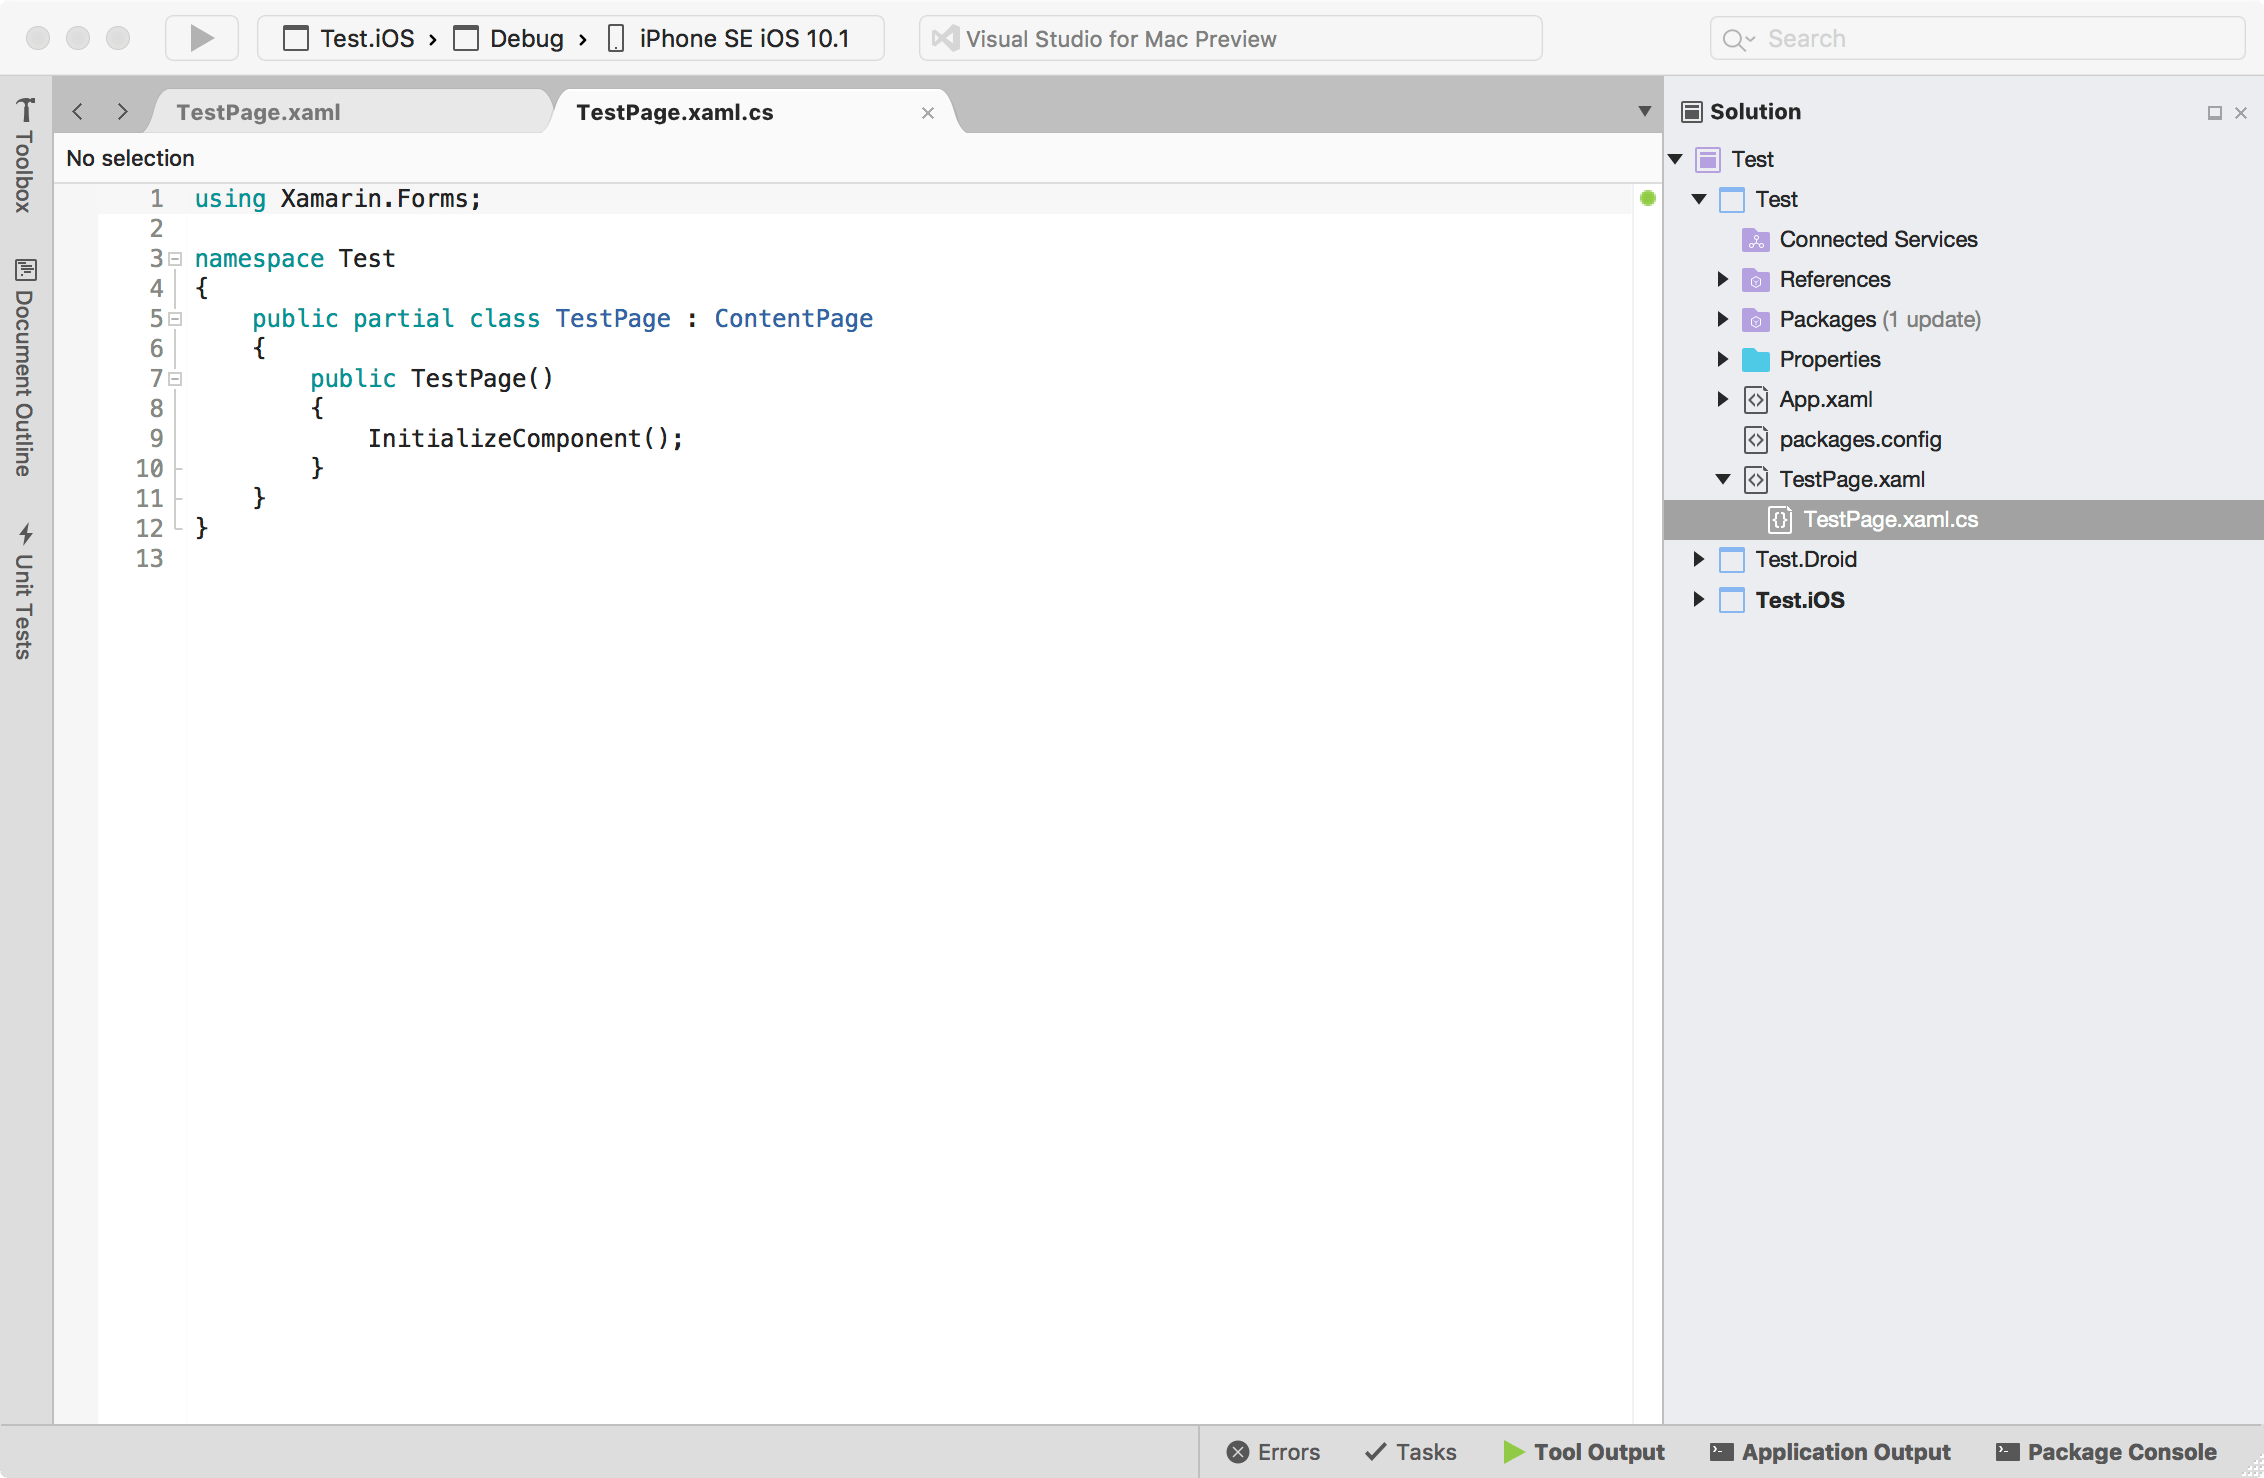 what is missing from visual studio for mac